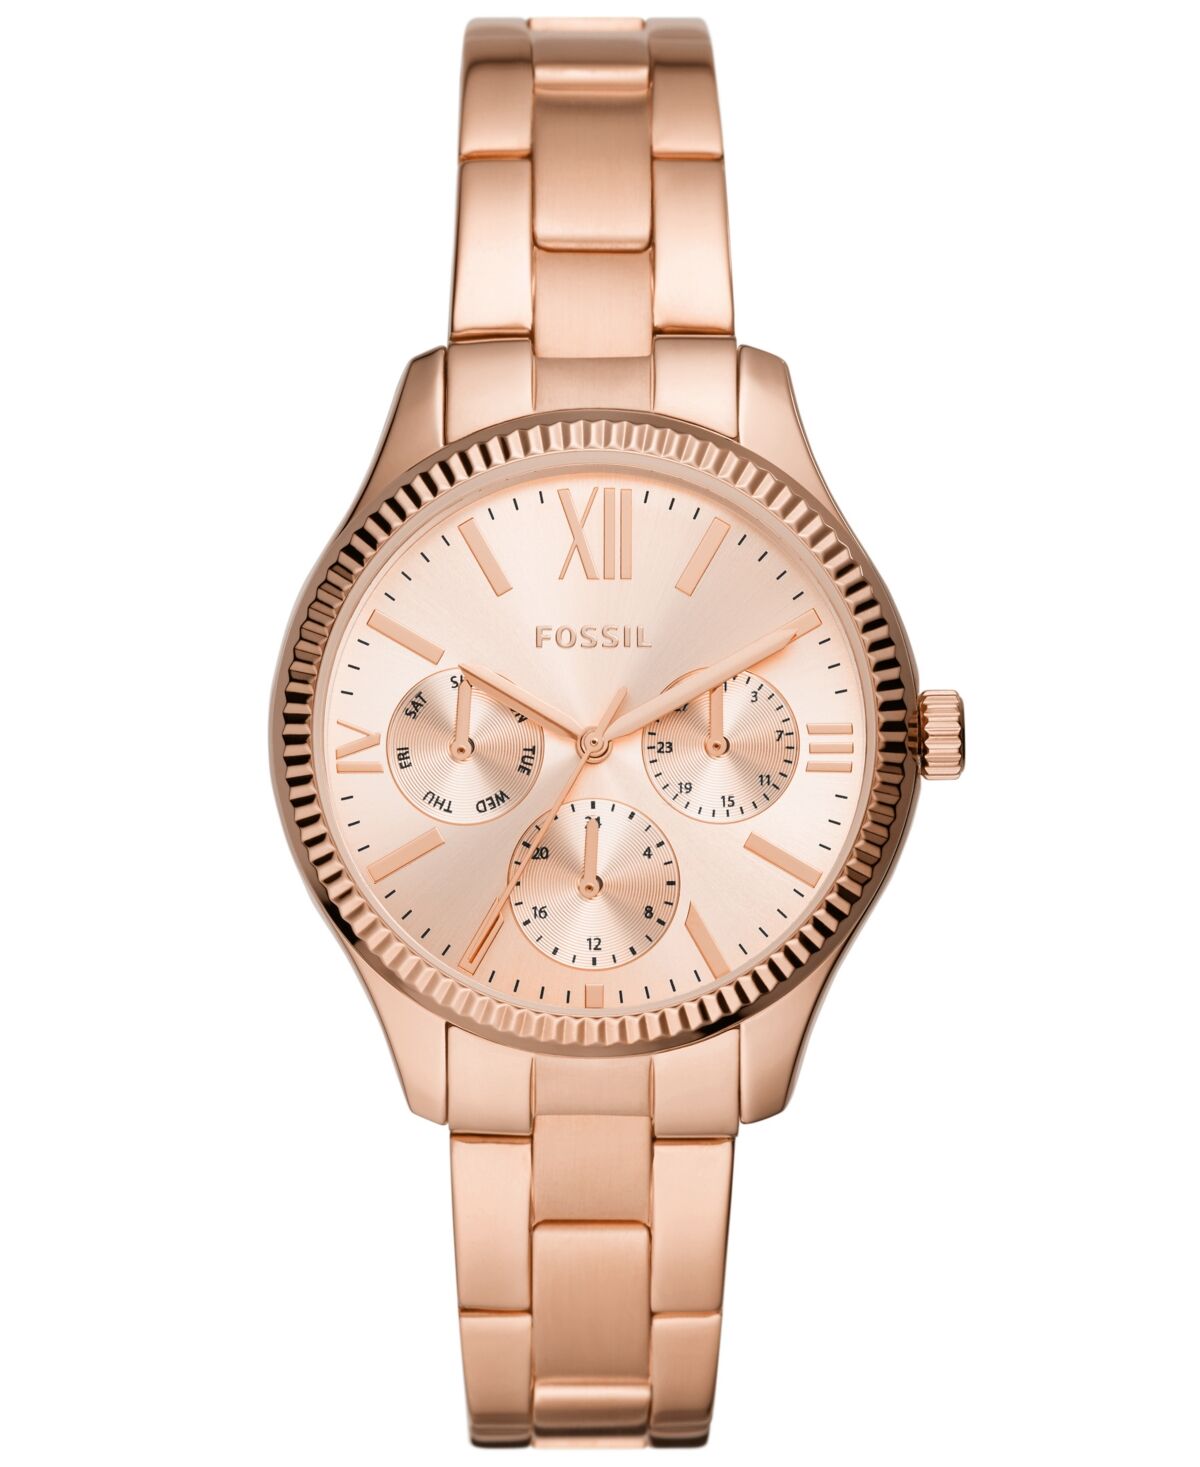 Fossil Women's Rye Multifunction Rose Gold-Tone Stainless Steel Watch, 36mm - Rose Gold-Tone